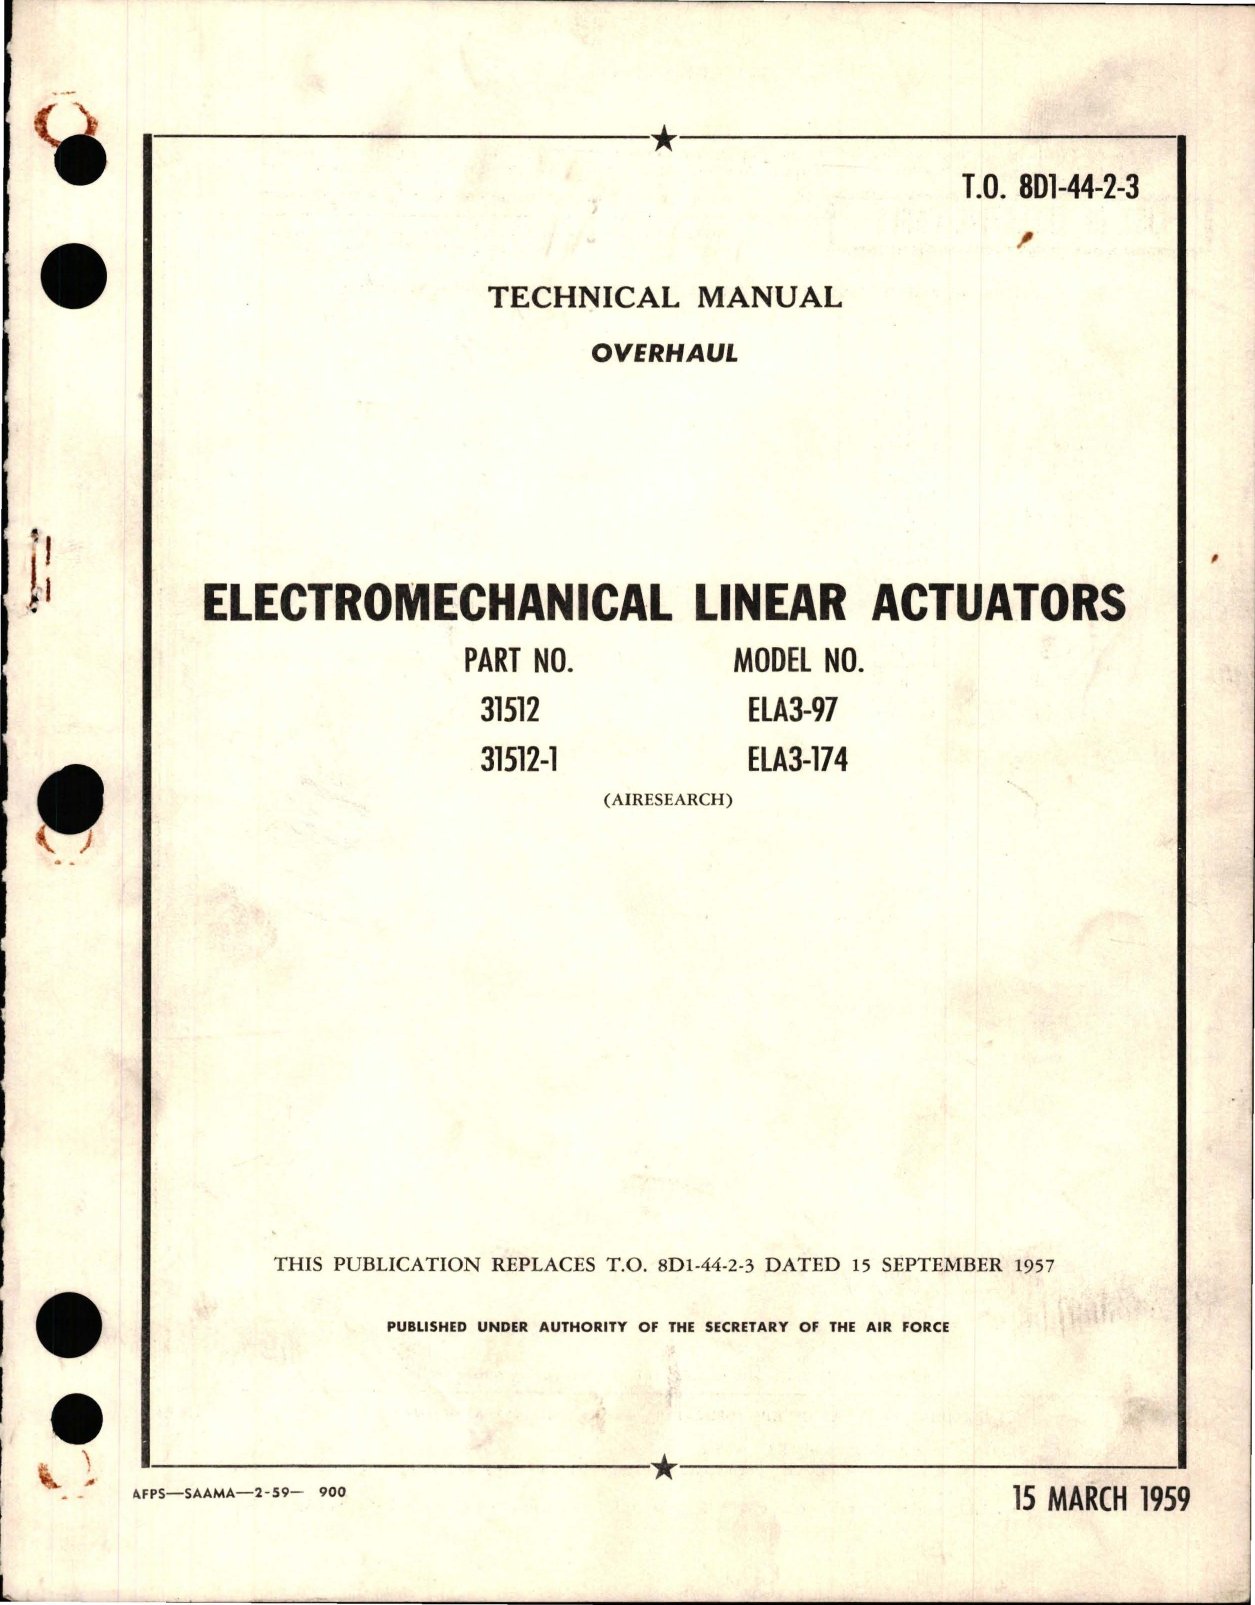 Sample page 1 from AirCorps Library document: Overhaul for Electromechanical Linear Actuators - Parts 31512 and 31512-1 